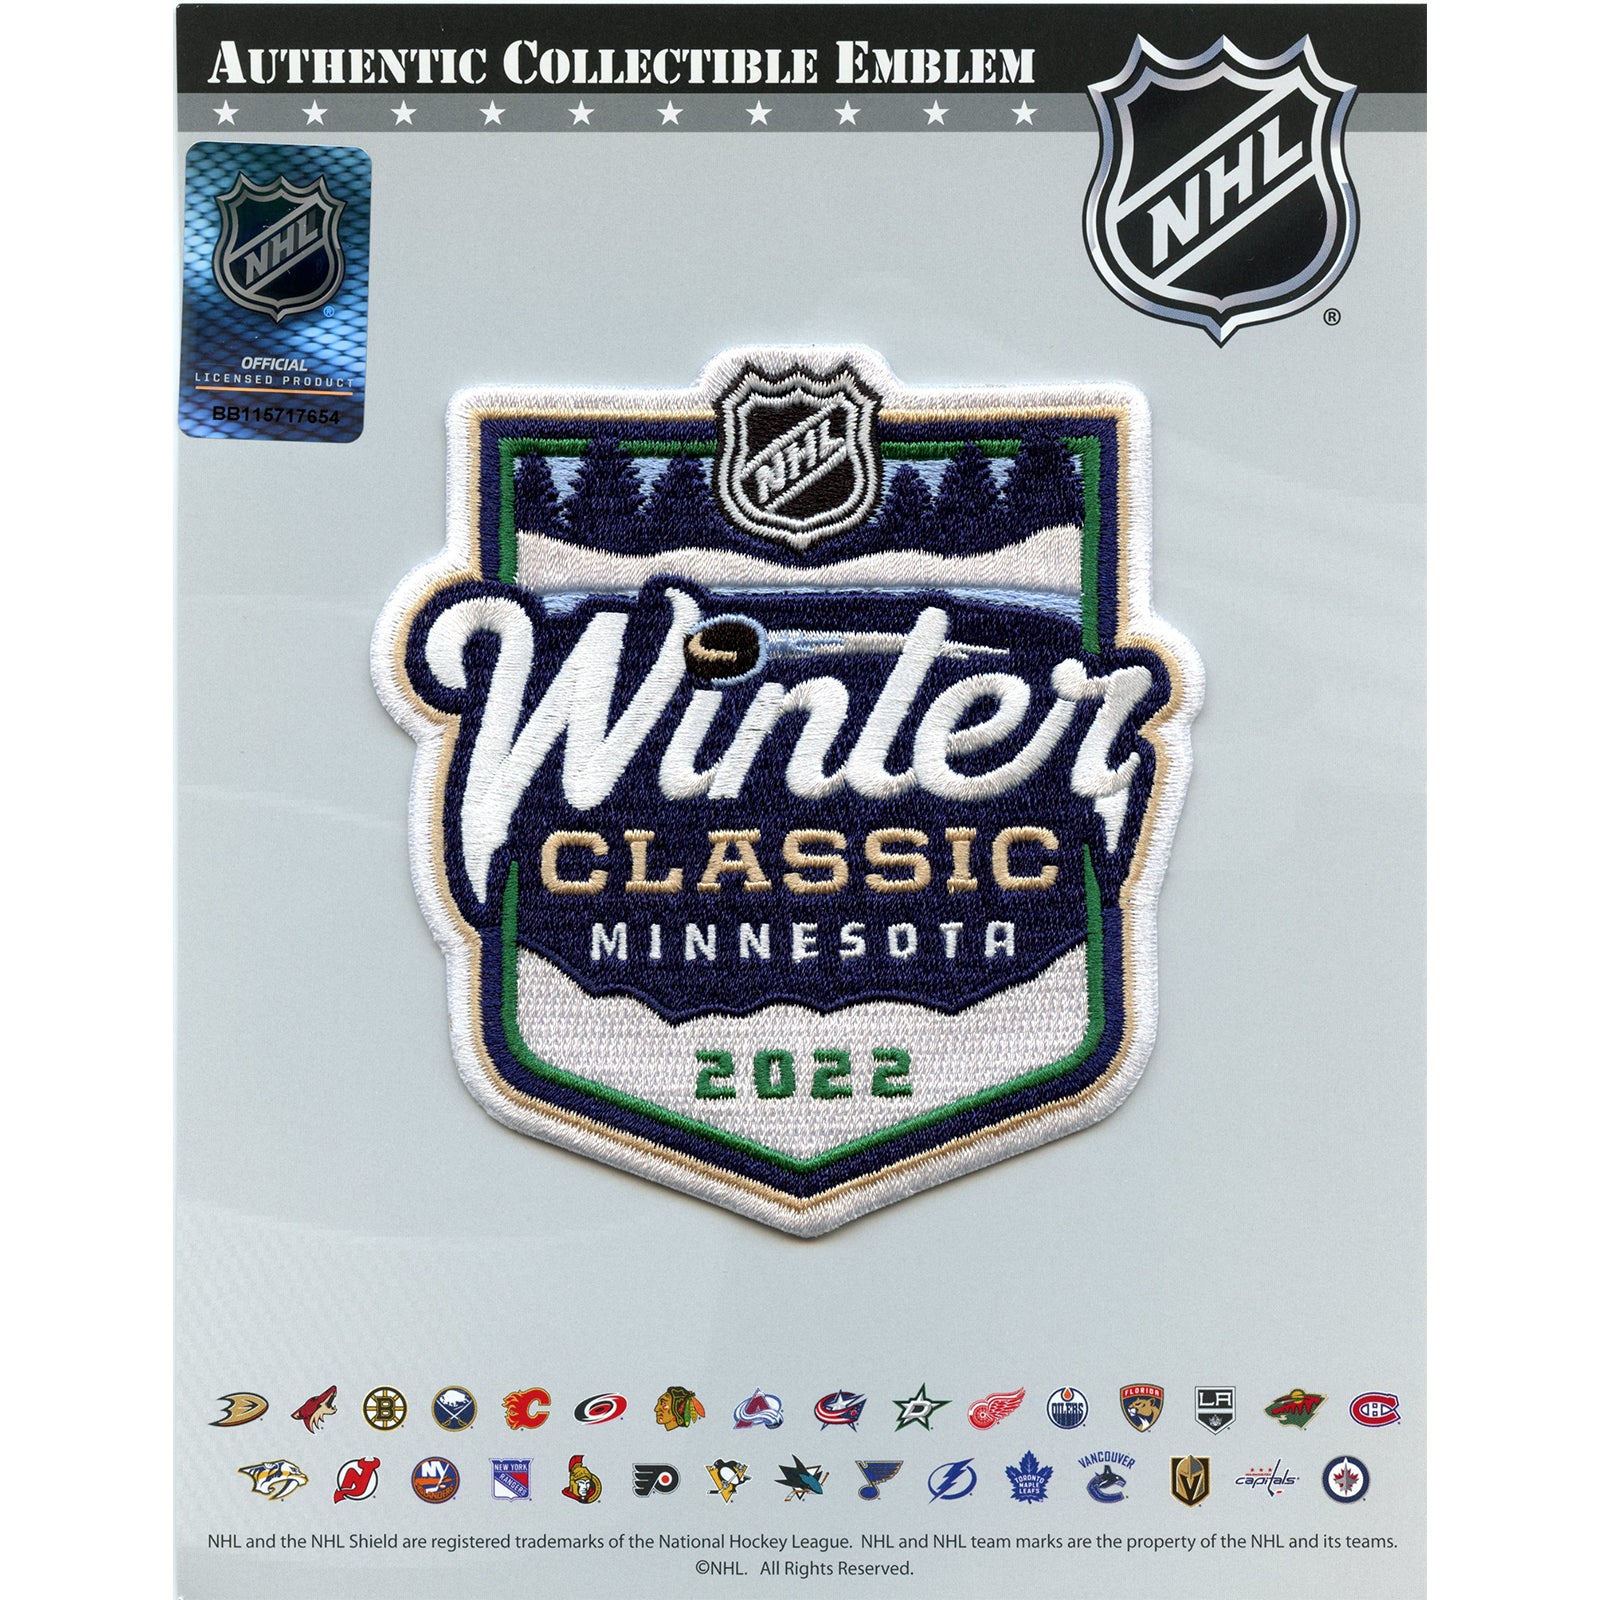 2022 Winter Classic Uniforms, Logos, and More for Blues and Wild